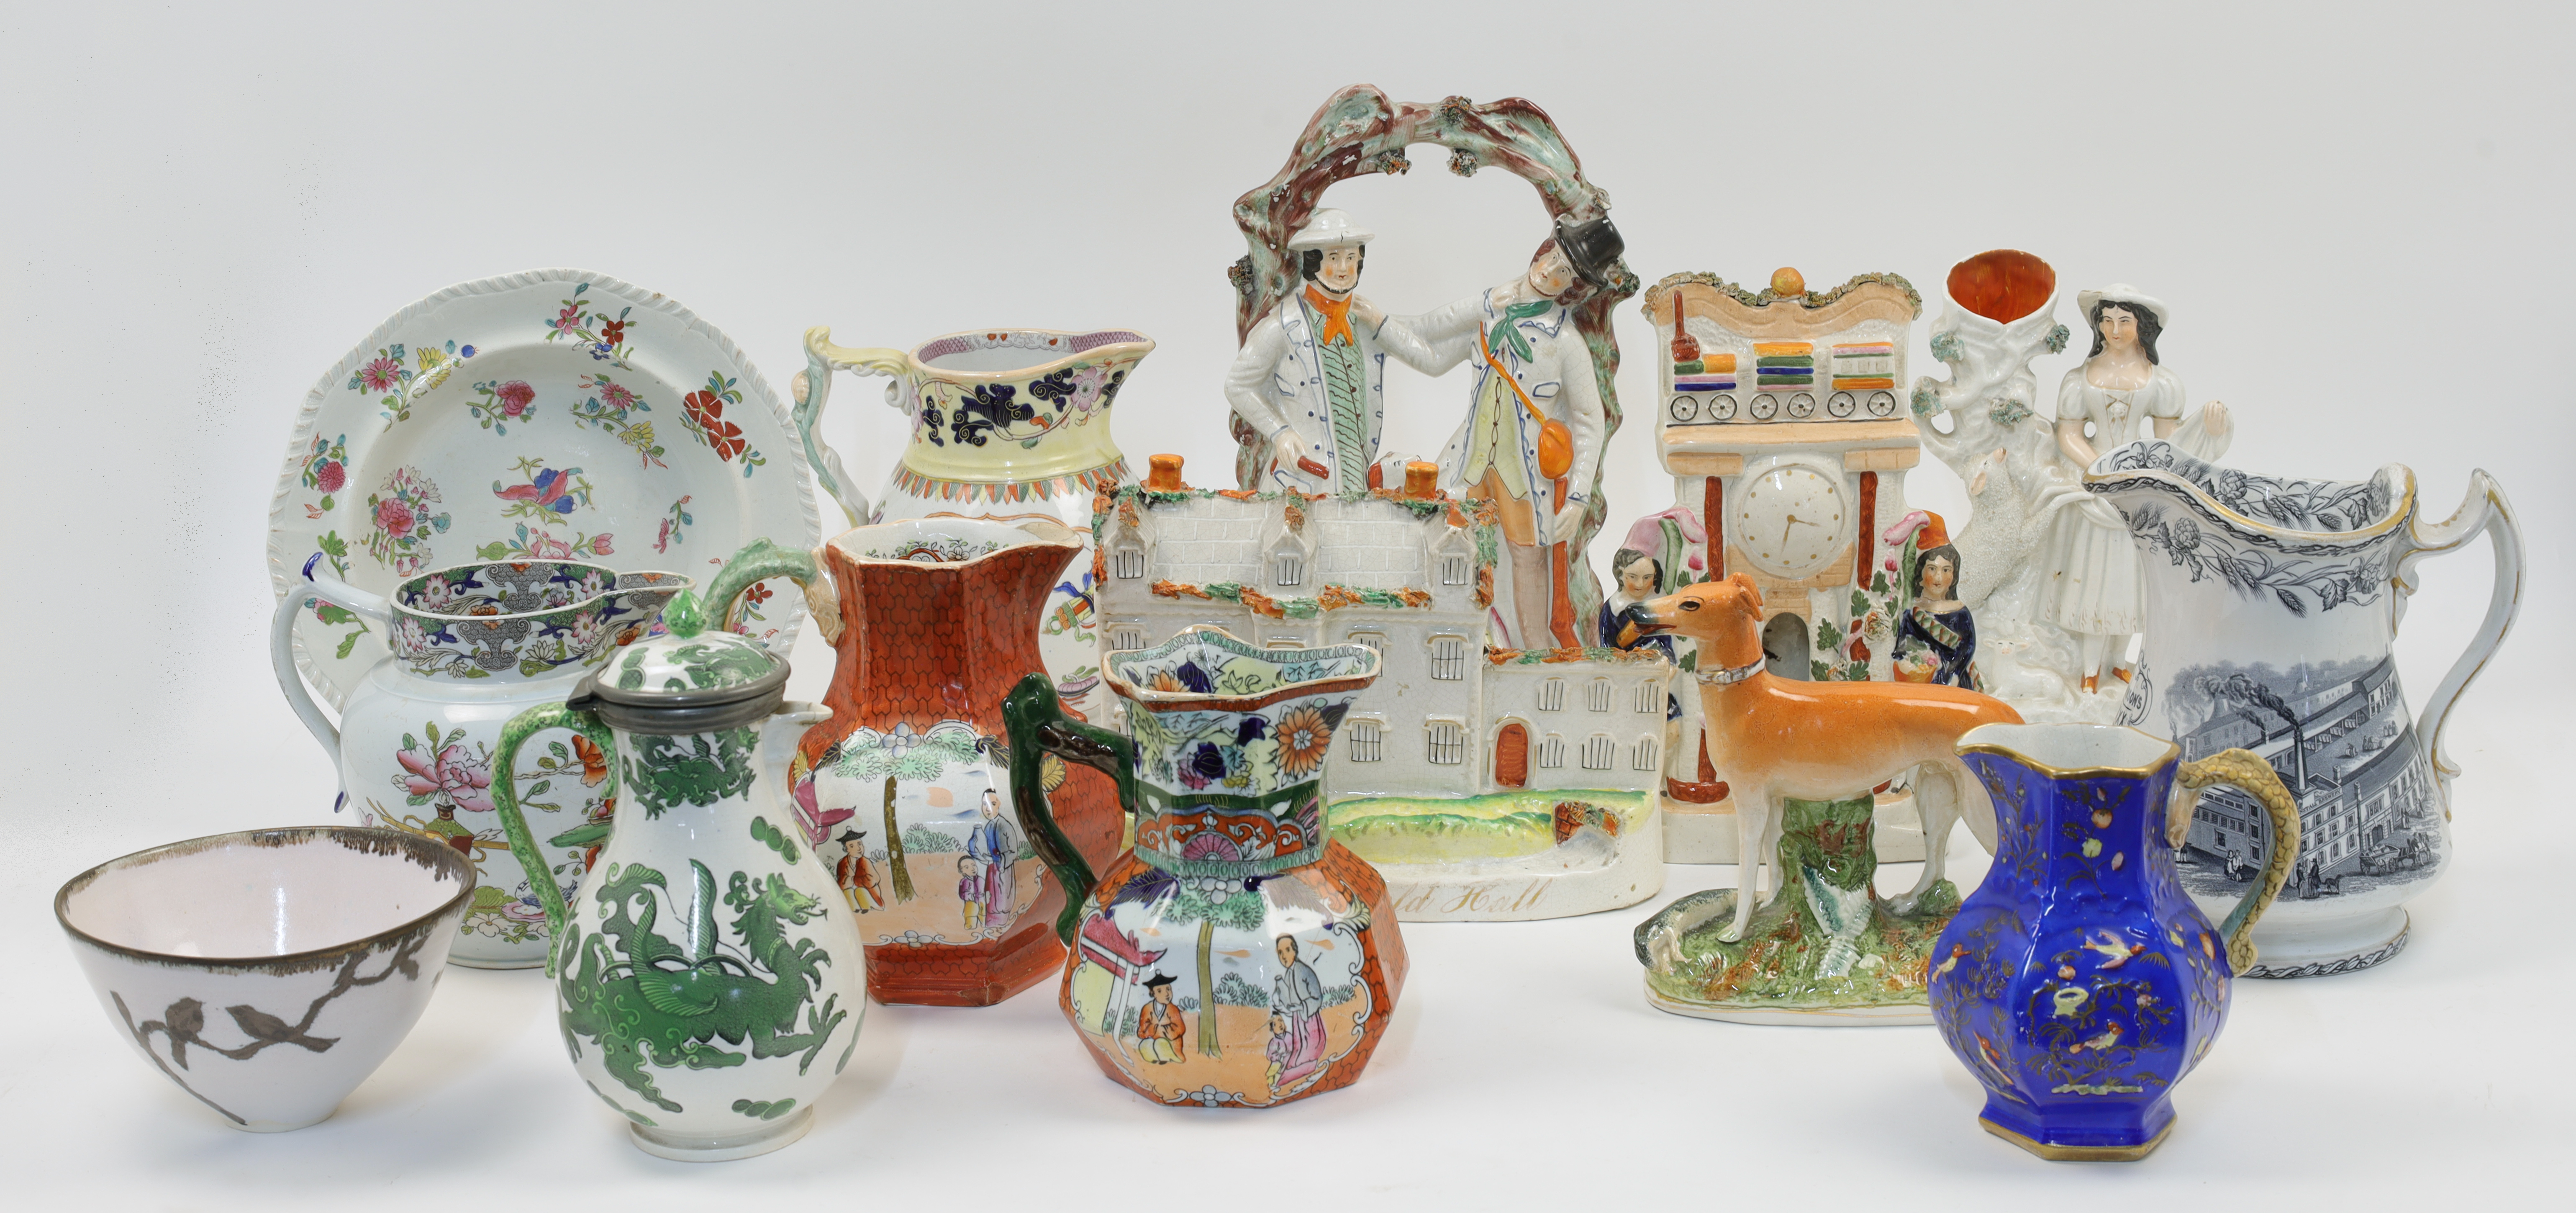 A quantity of mostly Staffordshire pottery and porcelain, 19th century, comprising: a group of Ma...